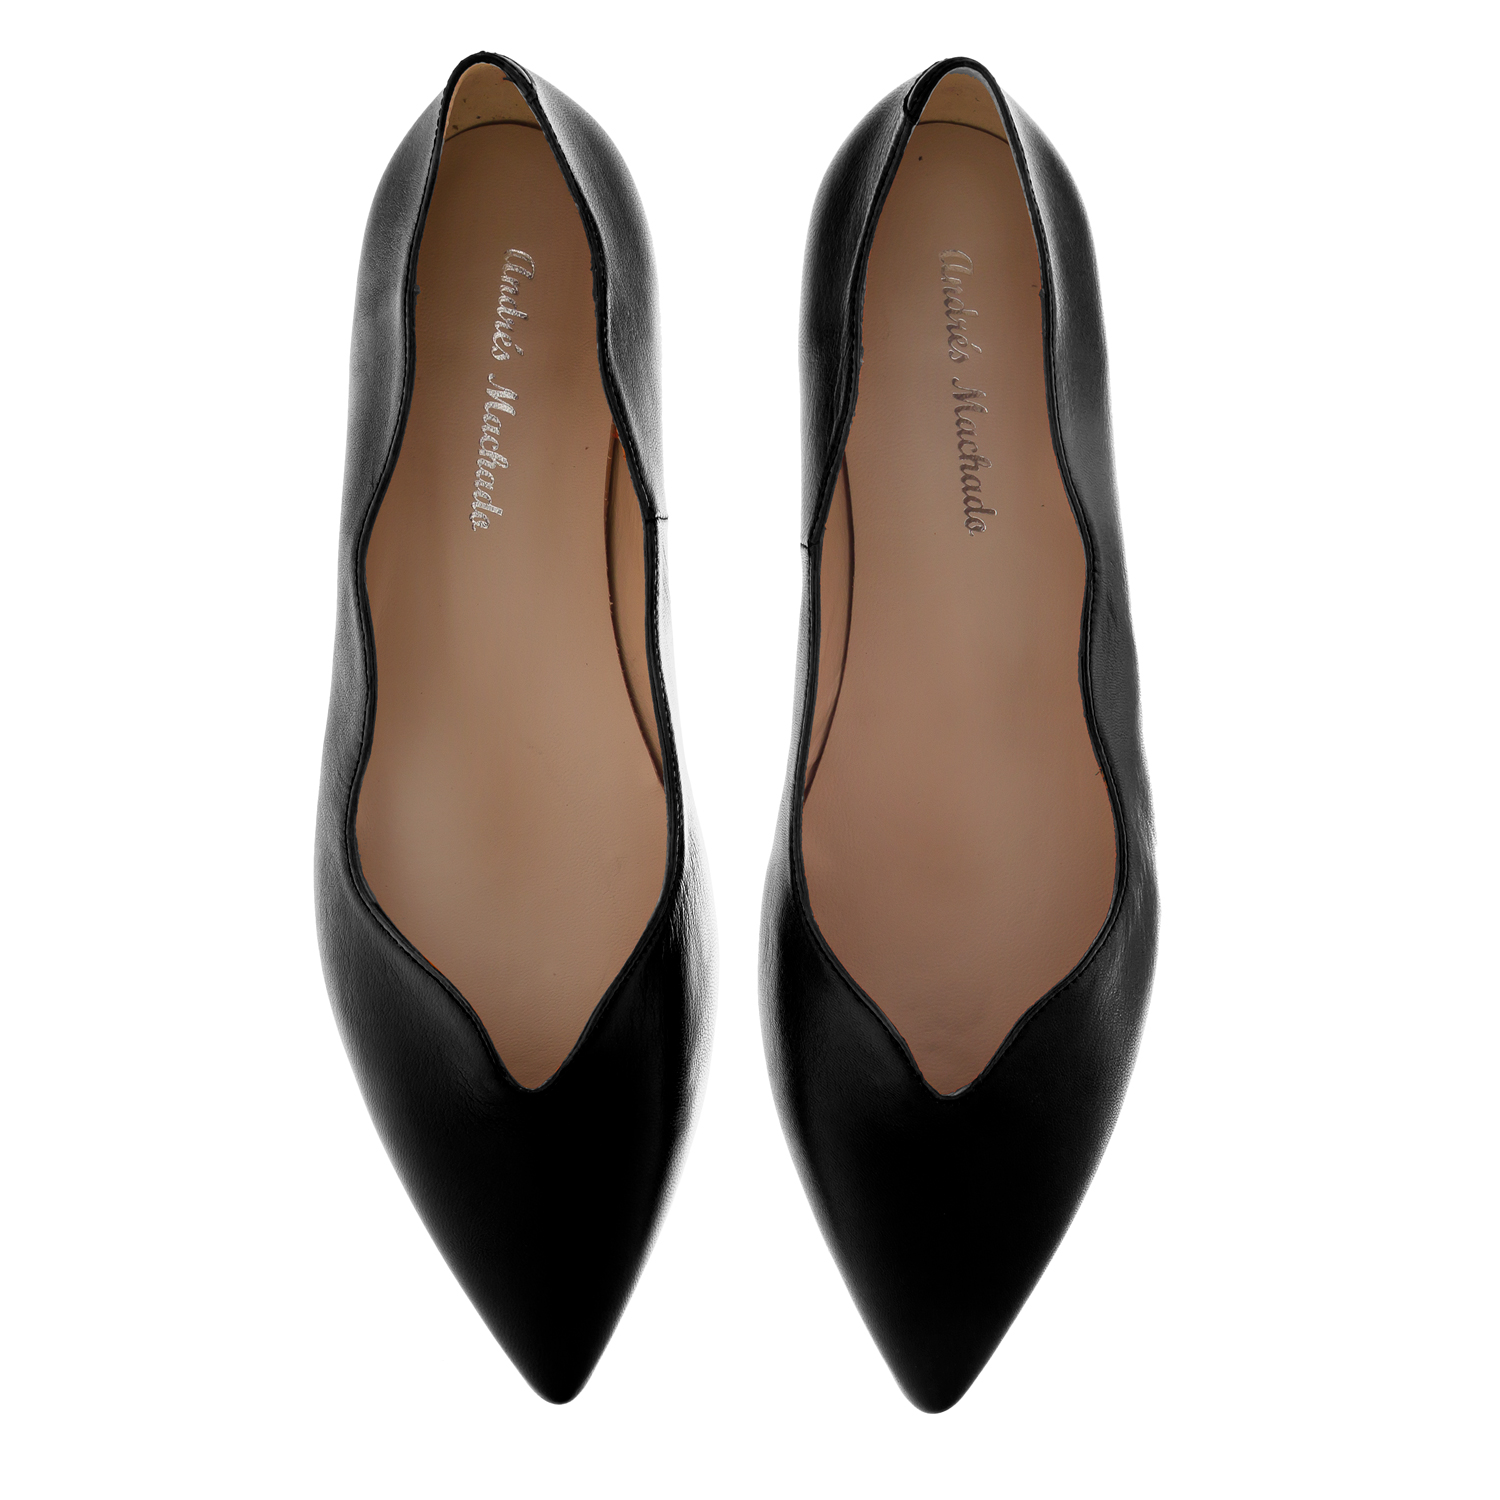 Waved Upper Ballet Flats in Black Nappa Leather 